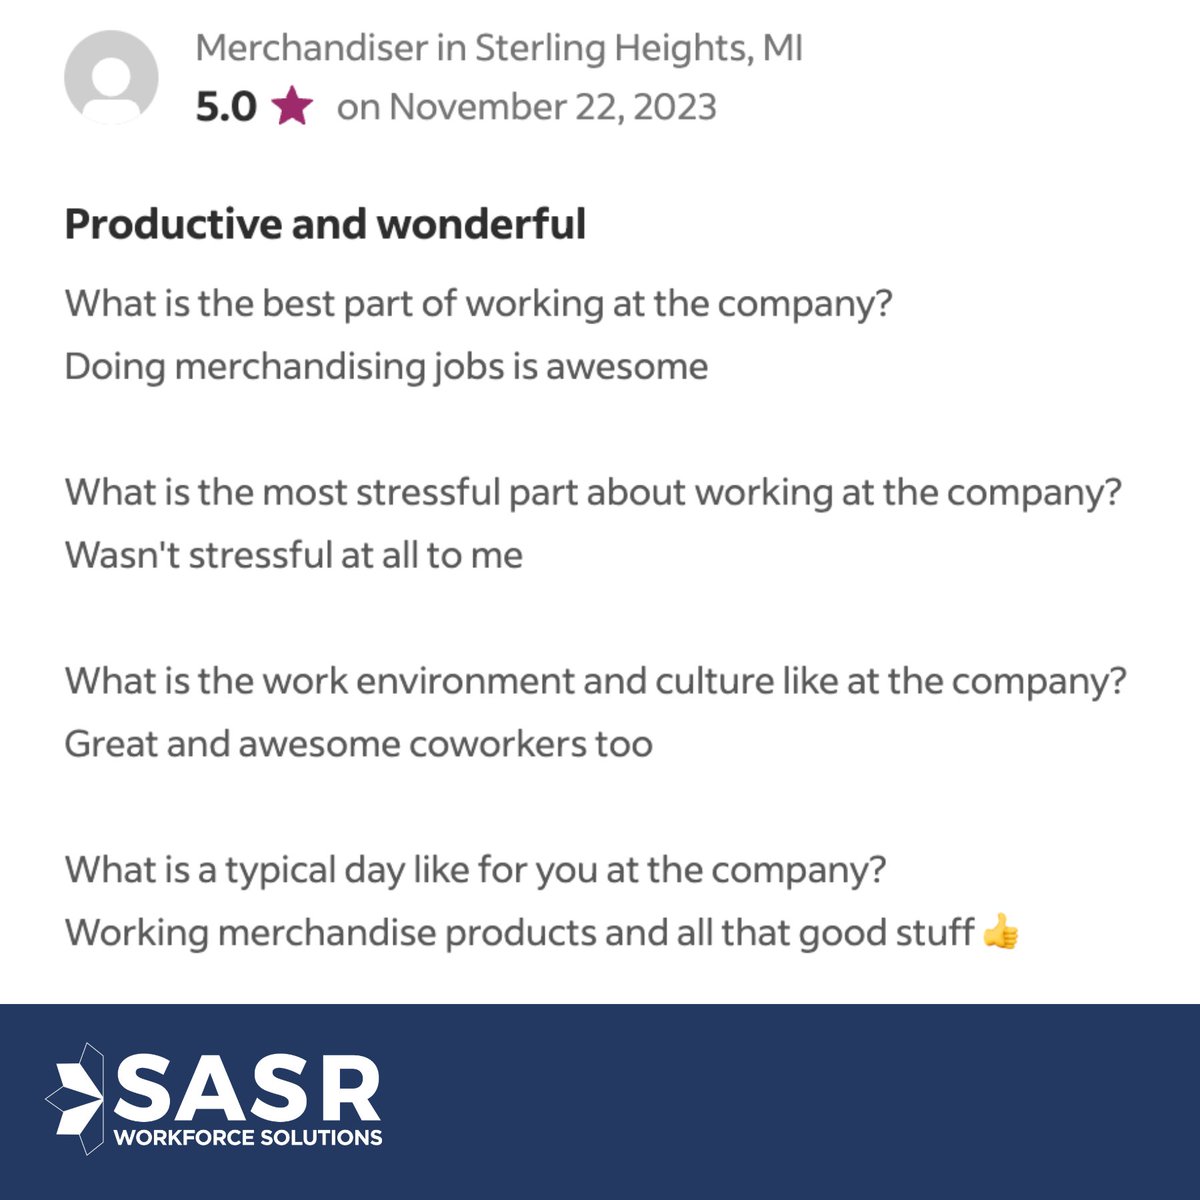 Shoutout to our amazing field team member for this review! We offer local and traveling jobs with leading brands such as Walmart, Dollar General, Best Buy, and many more. Click the link in our bio to learn more! #Hiring #NowHiring #TravelJobs.